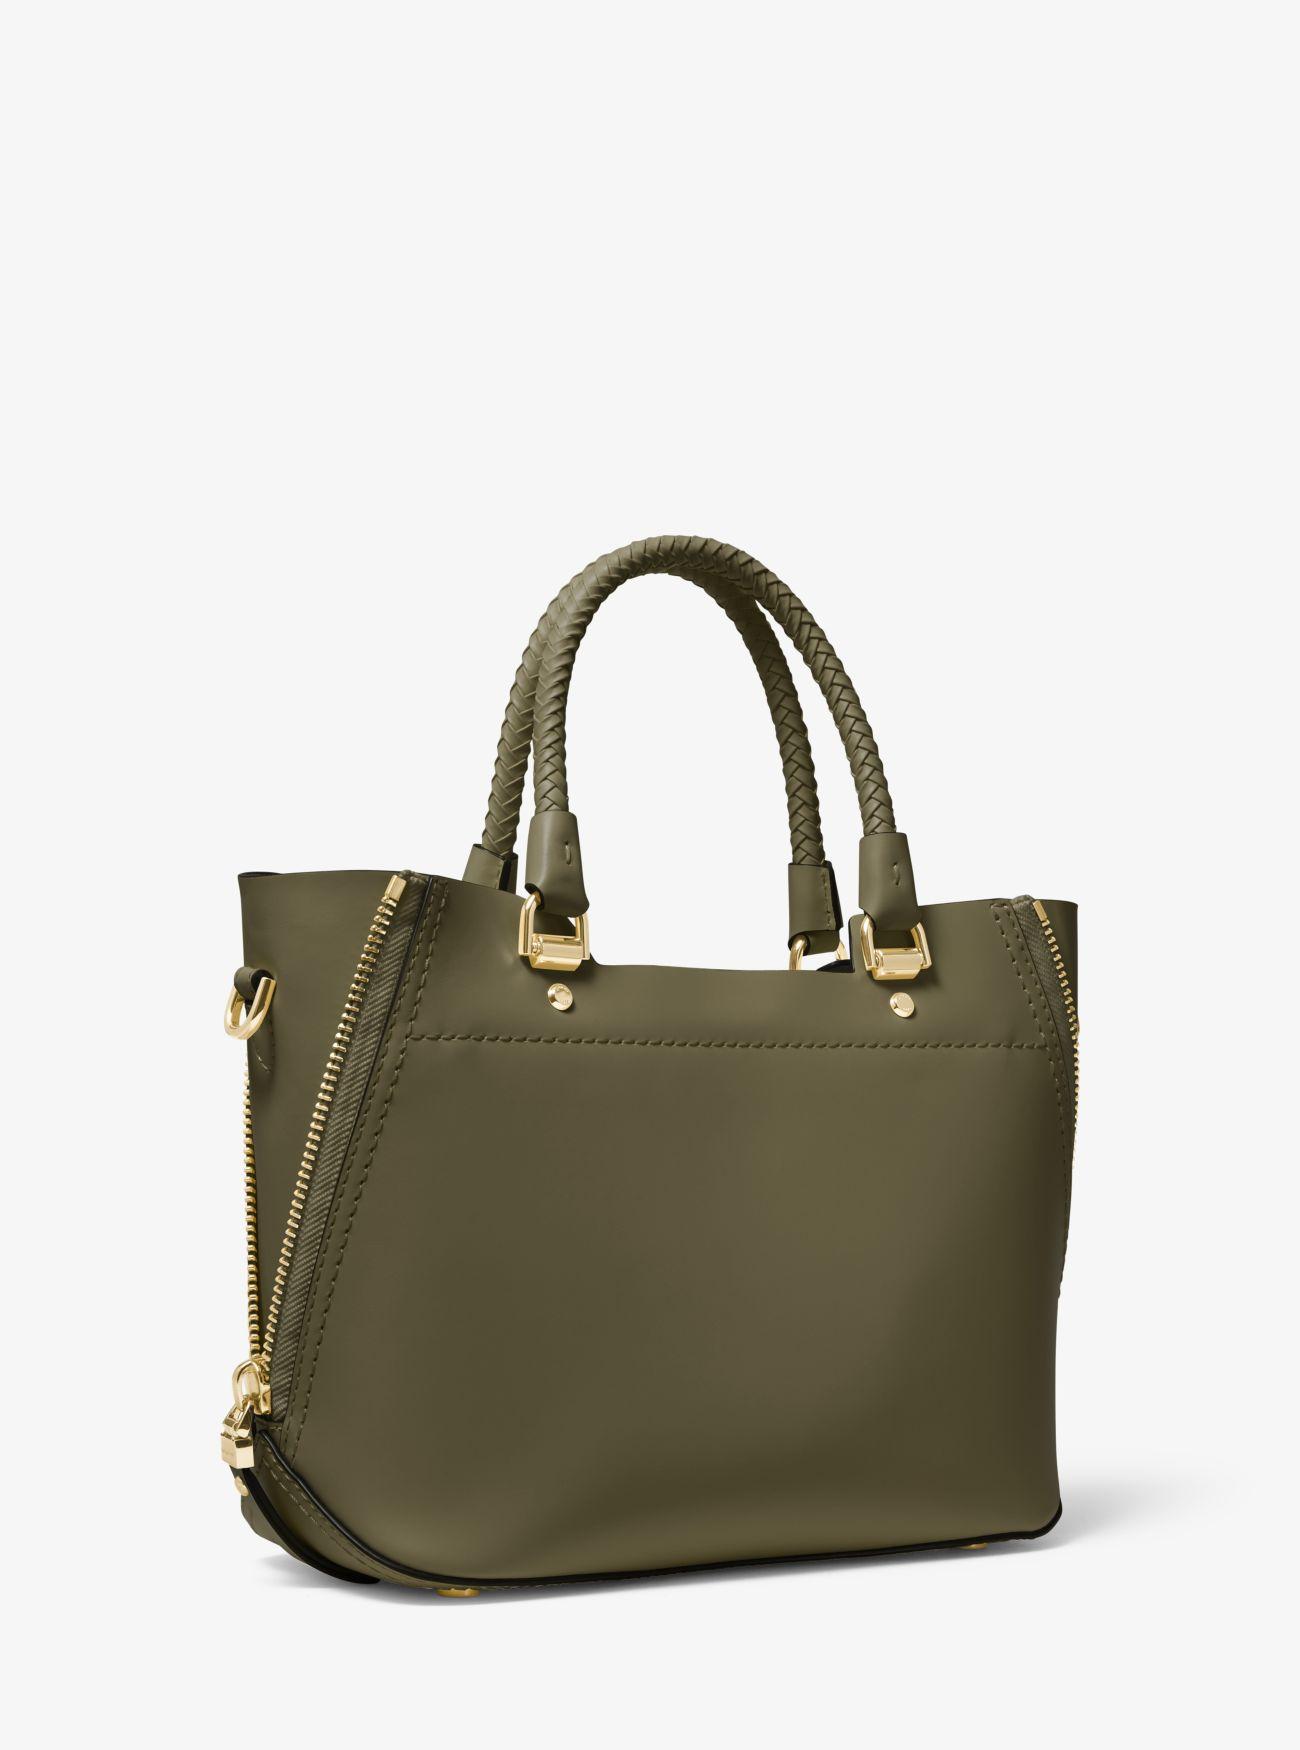 MICHAEL Michael Kors Blakely Leather Satchel in Olive (Green) - Save 52 ...